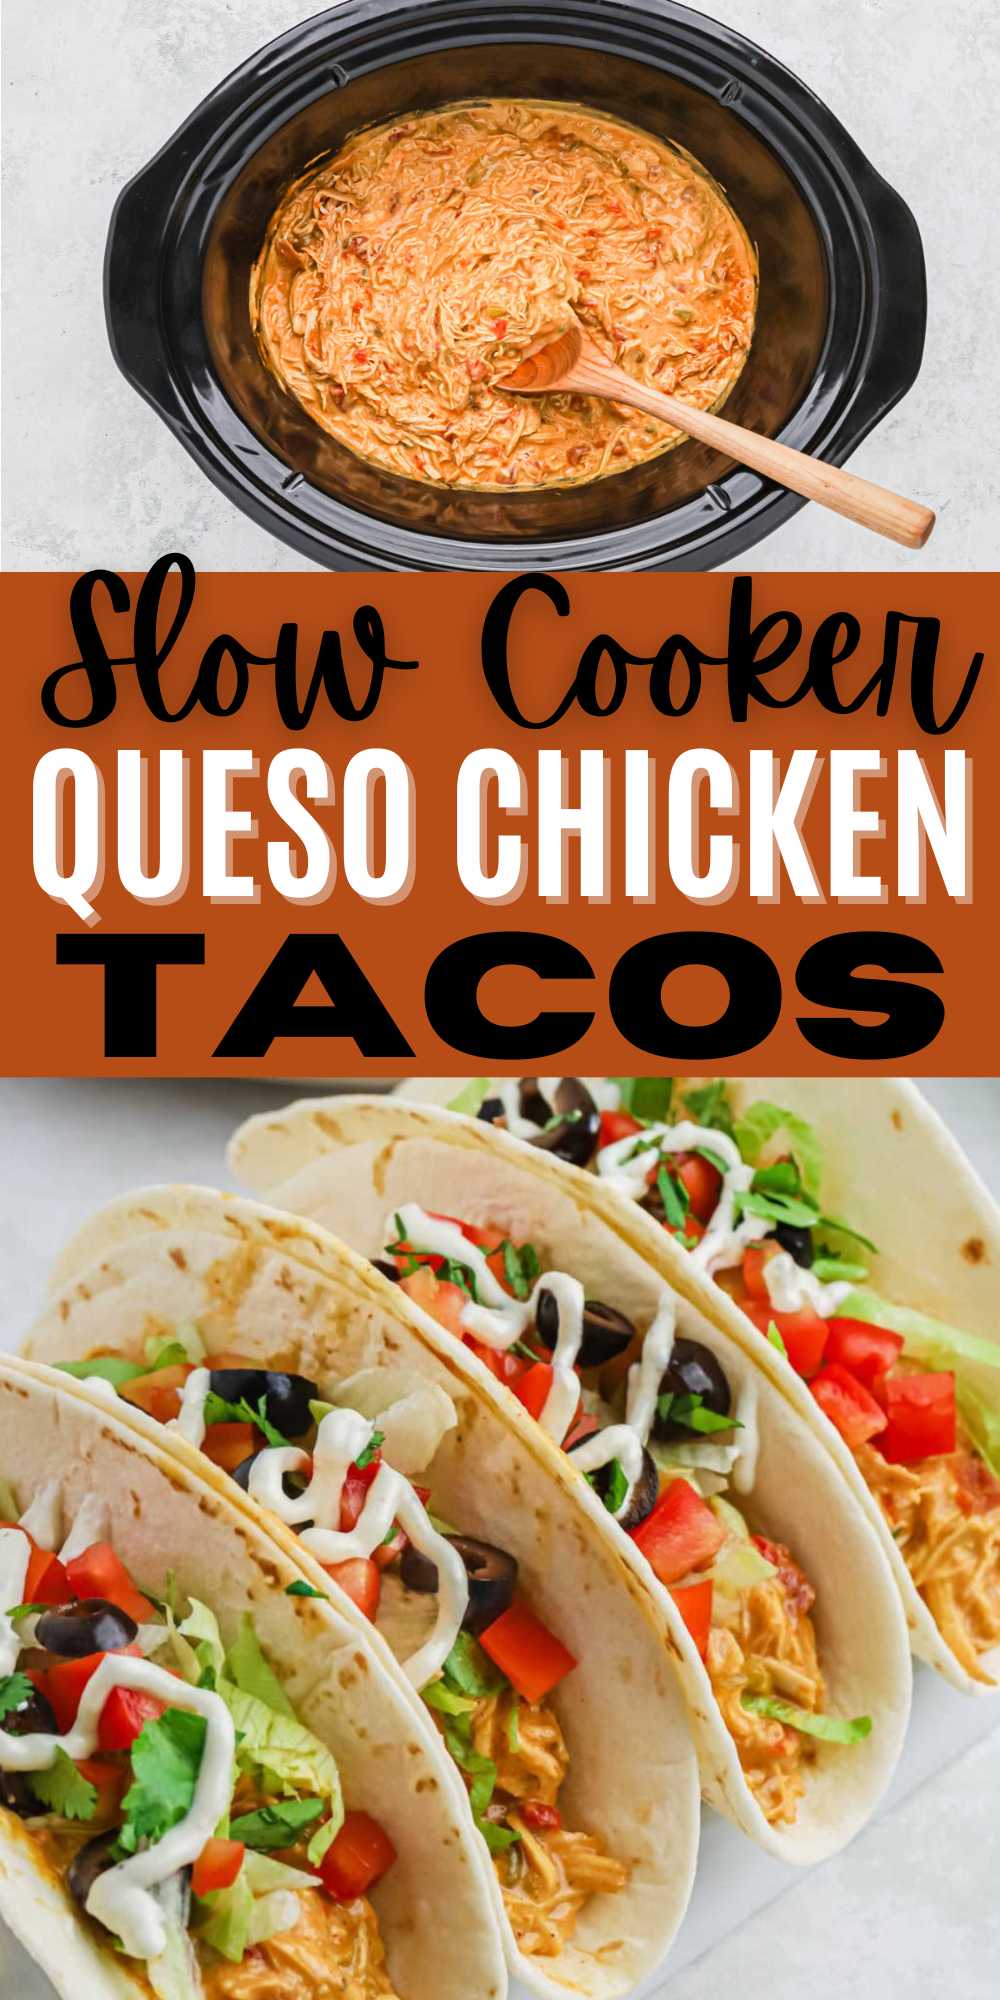 Slow Cooker Queso Chicken Tacos is made with easy ingredients. Change up Taco Tuesday with this easy and flavorful taco slow cooker recipe. Chicken Queso Tacos combines chicken, taco seasoning, queso and diced tomatoes to make an amazing cheesy taco recipe. #eatingonadime #quesochickentacos #slowcookertacorecipes